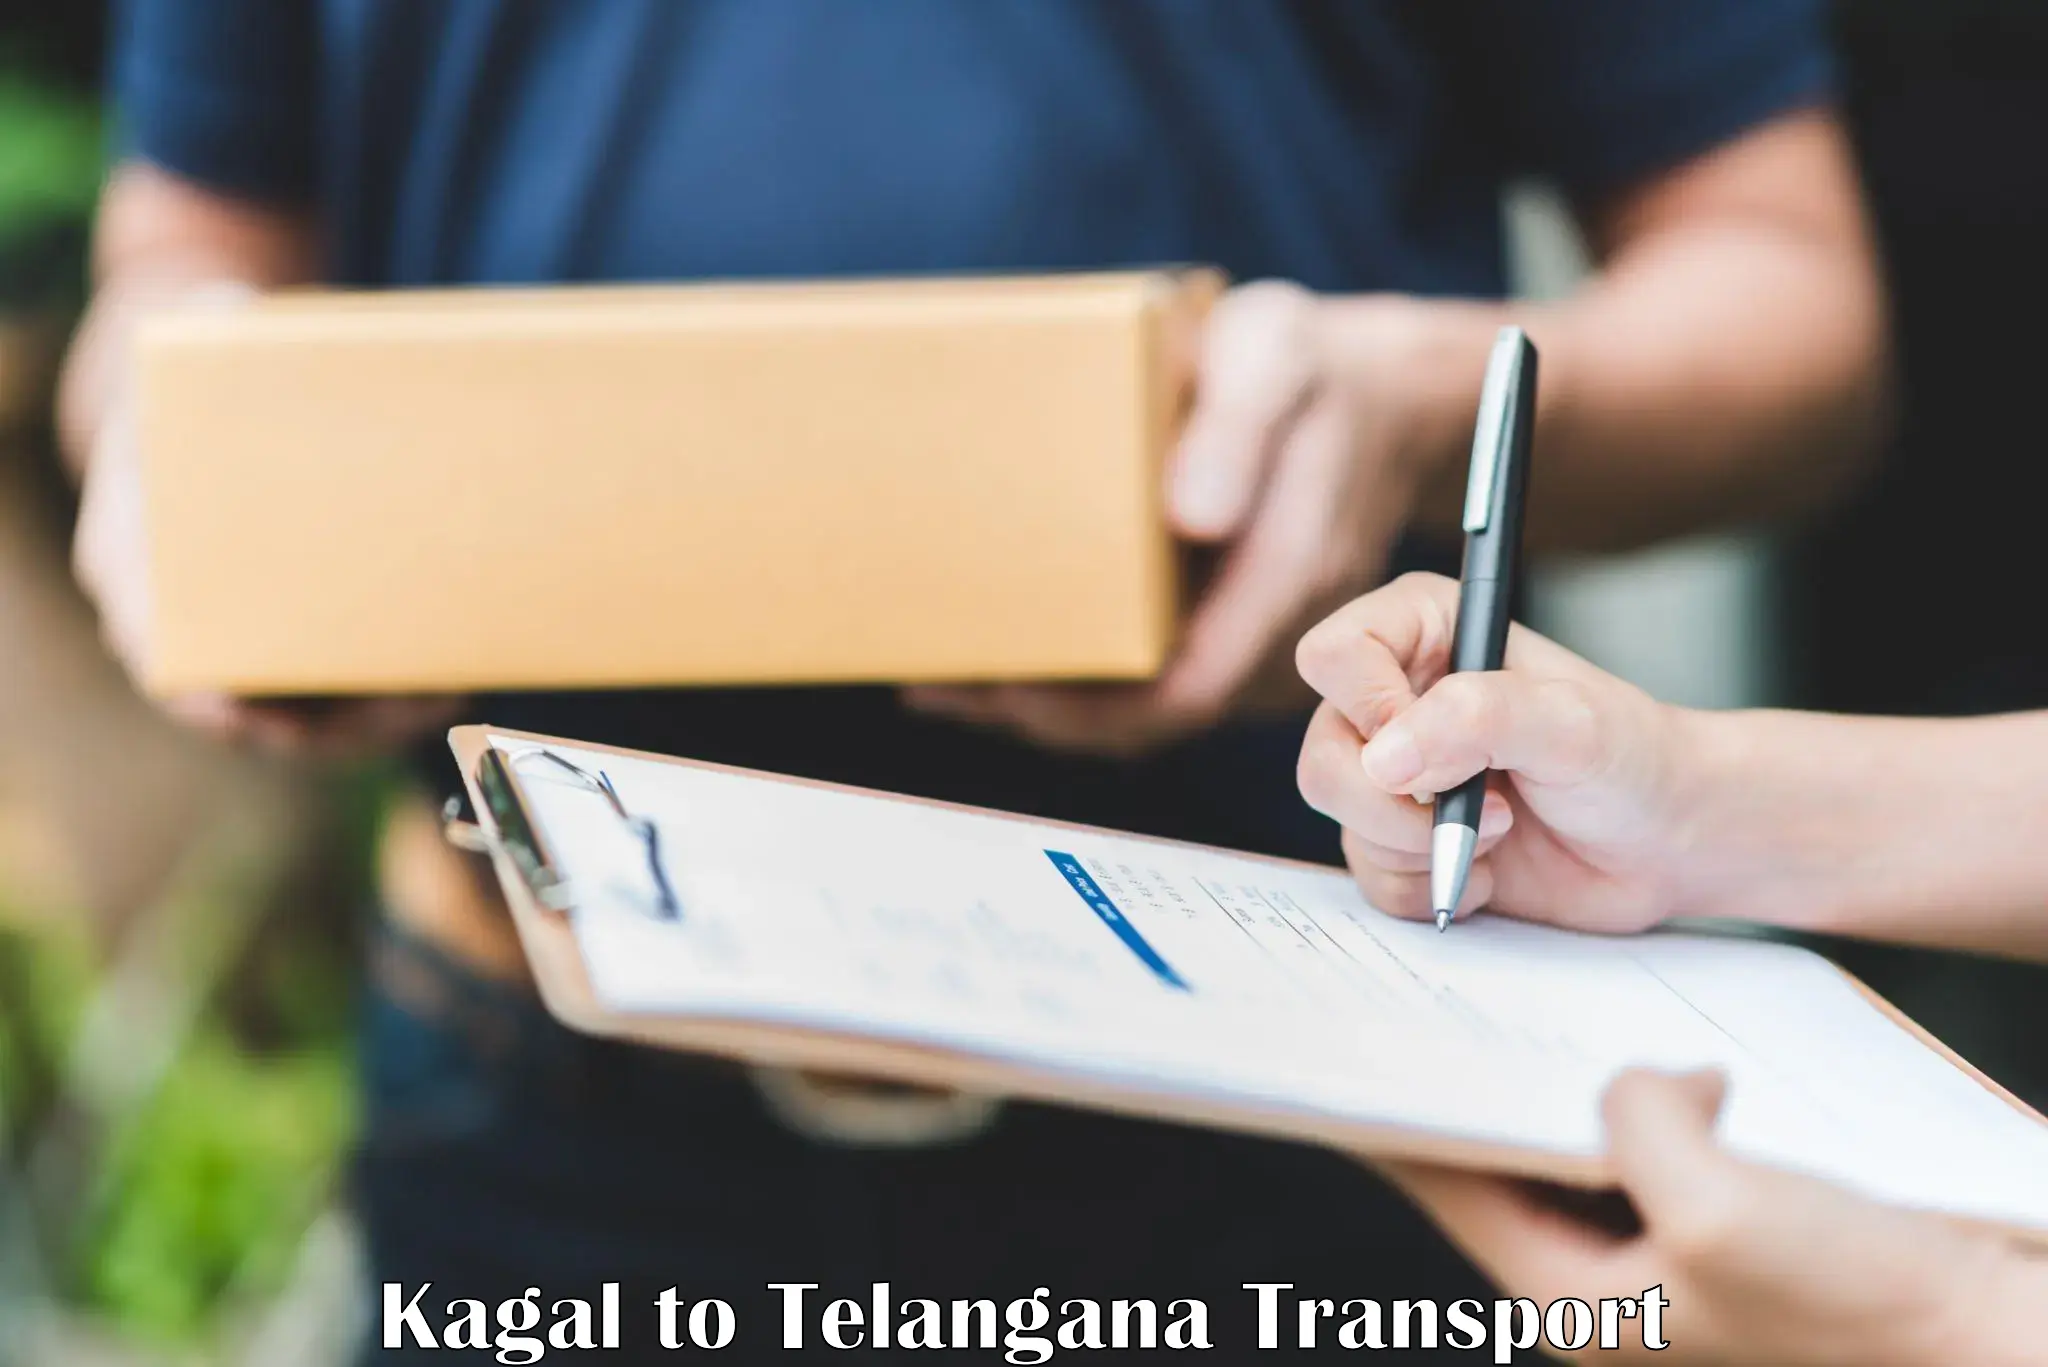 Transport in sharing Kagal to Sultanabad